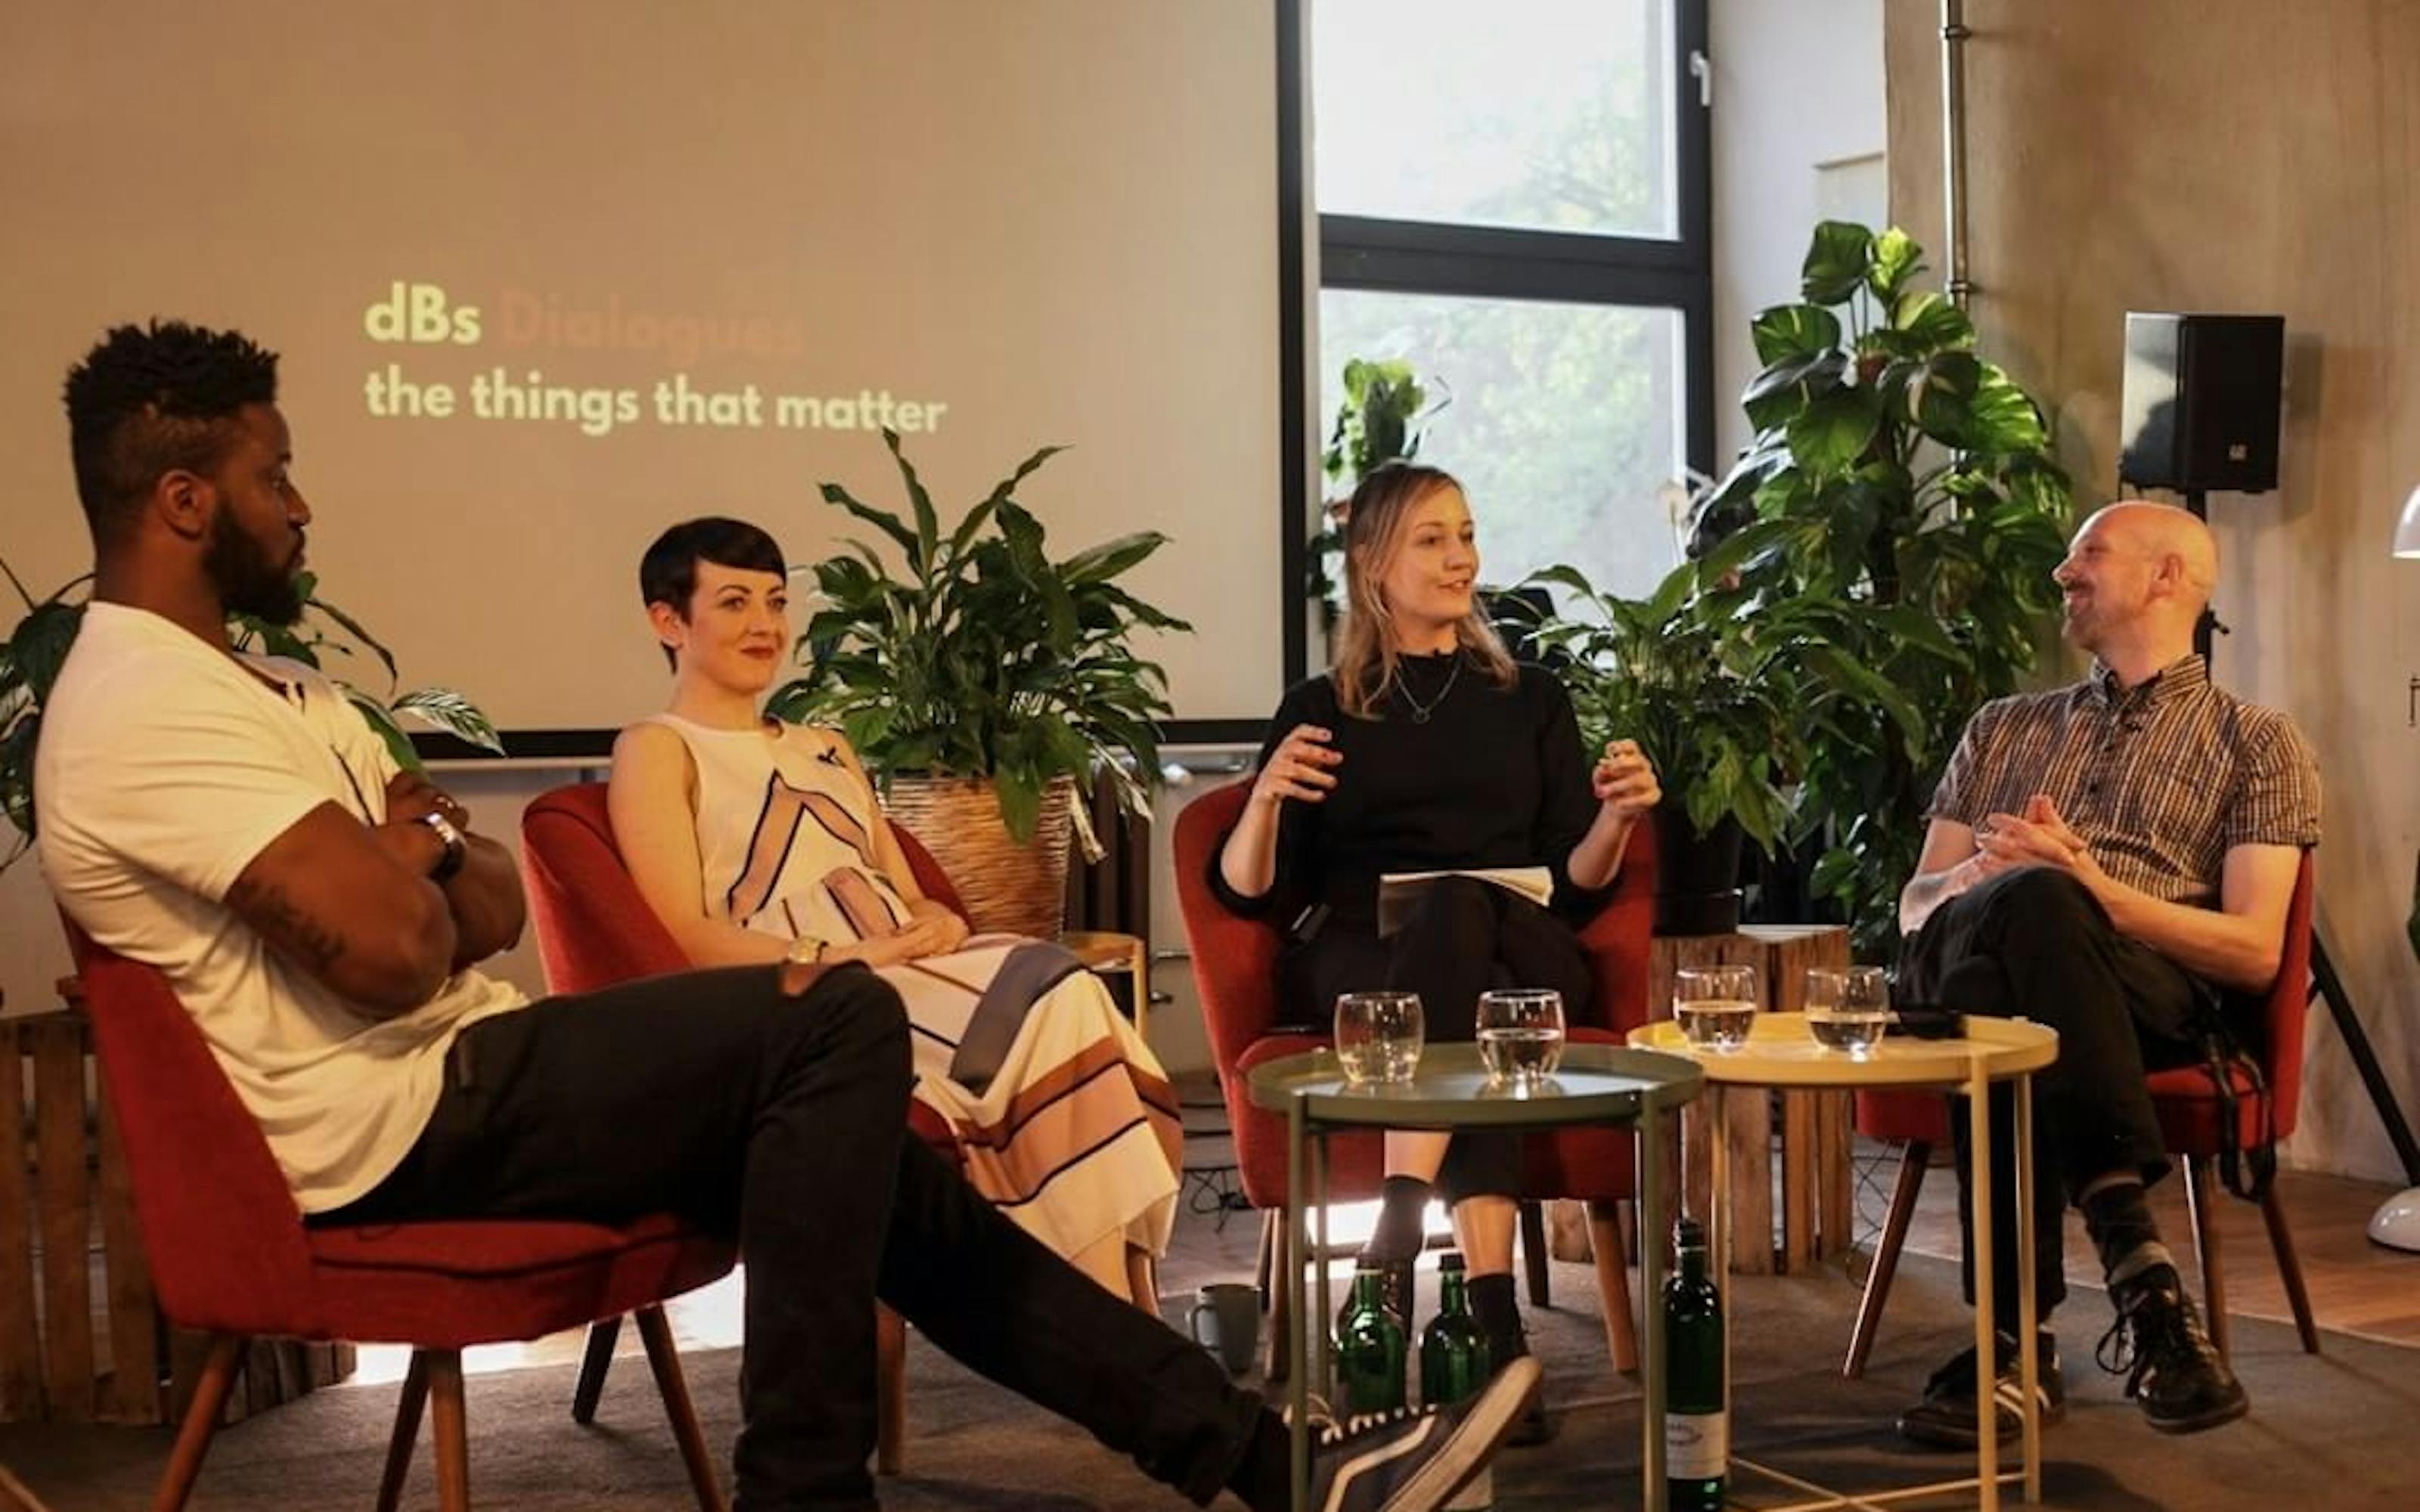 Industry & Environment | dBs Dialogues (now Catalyst Dialogues) mental health panel talk at Catalyst Berlin